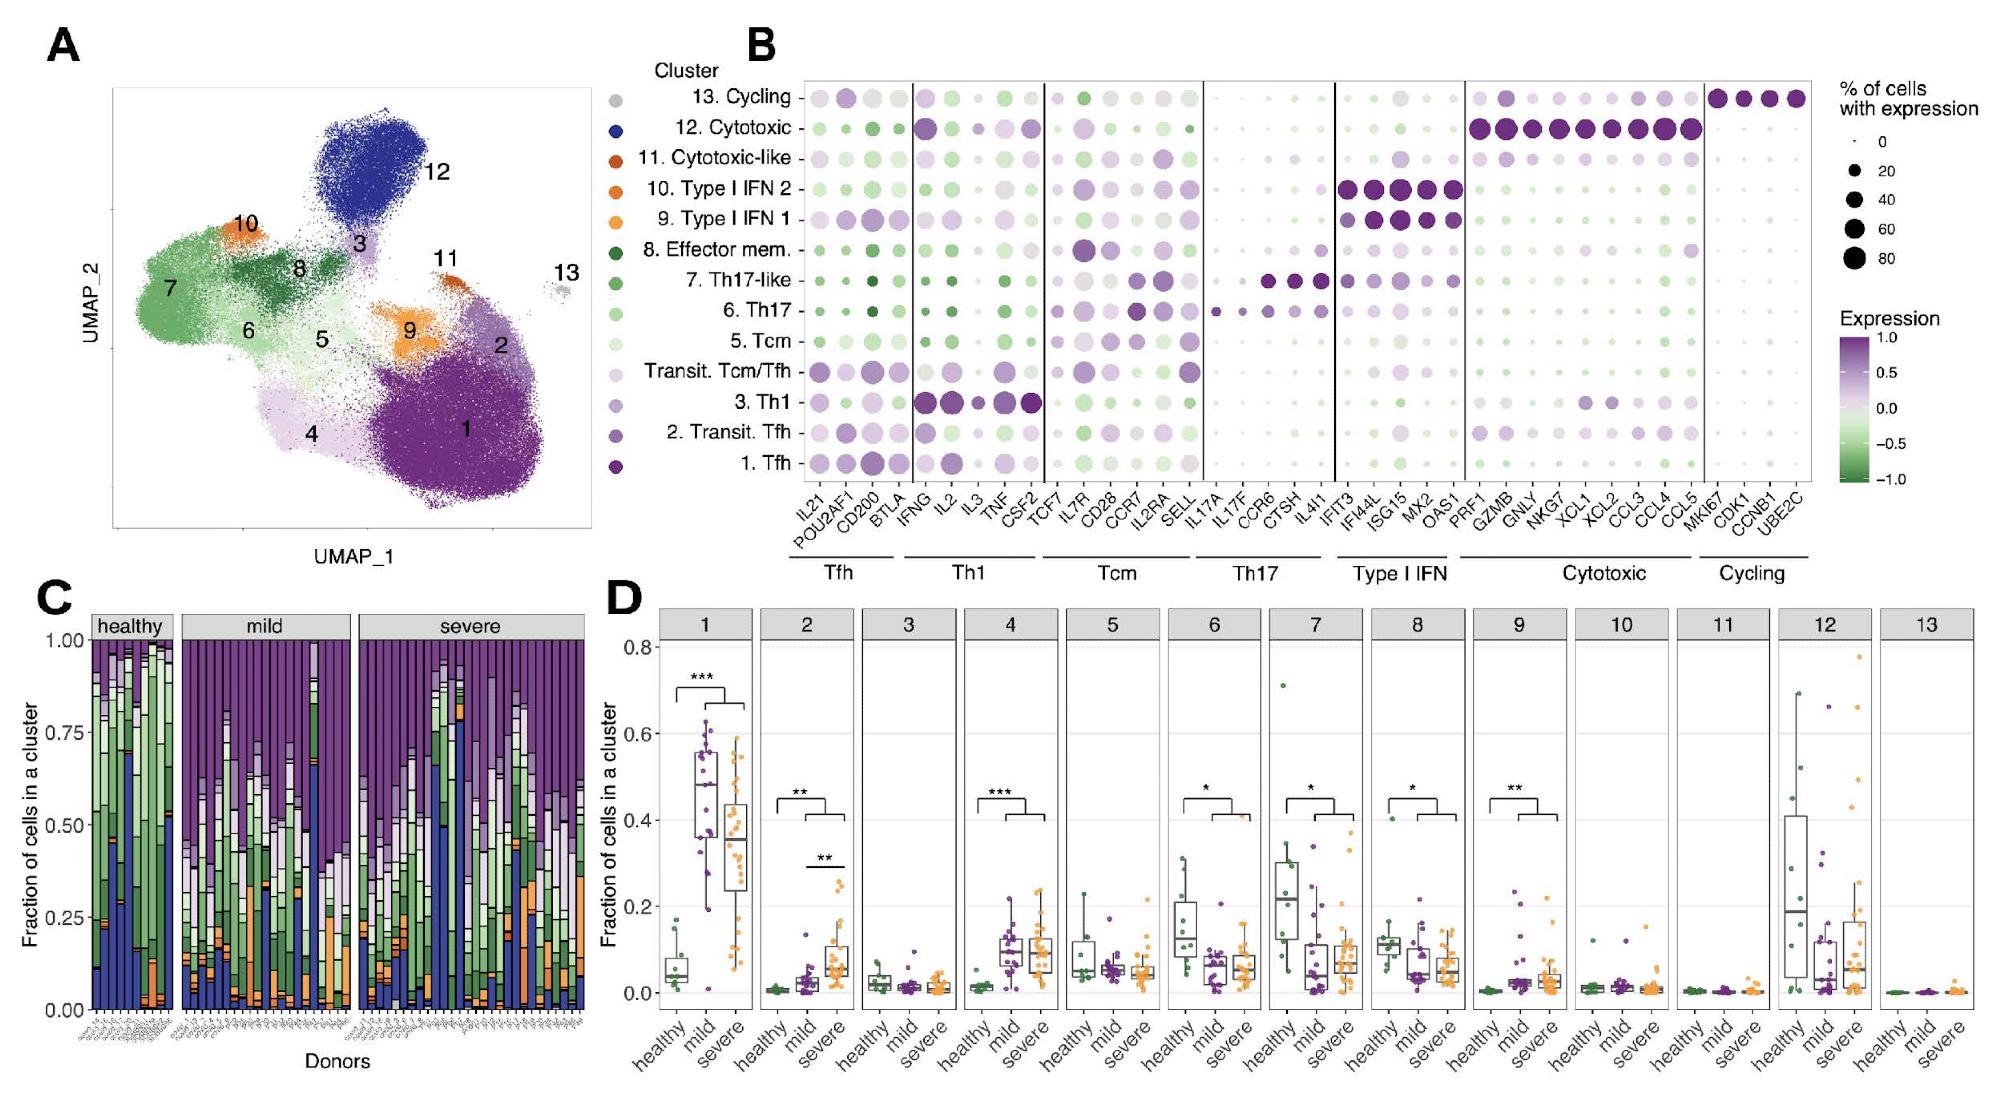 A. UMAP of single cells for merged (Bacher et al., 2020; Meckiff et al., 2020) datasets of SARS-CoV-2 antigen-enriched CD4 T cells based. Colors show clusters of cells with distinct gene expression profiles B. Differentially expressed genes in each GEX cluster. C. Distribution of cells between GEX clusters is plotted for each donor. Healthy donors less Tfh cells (populations 1 and 2) D. Boxplots showing cell proportion distribution among functional clusters for each patient (Mann-Whitney U test, Bonferroni multiple comparison correction).